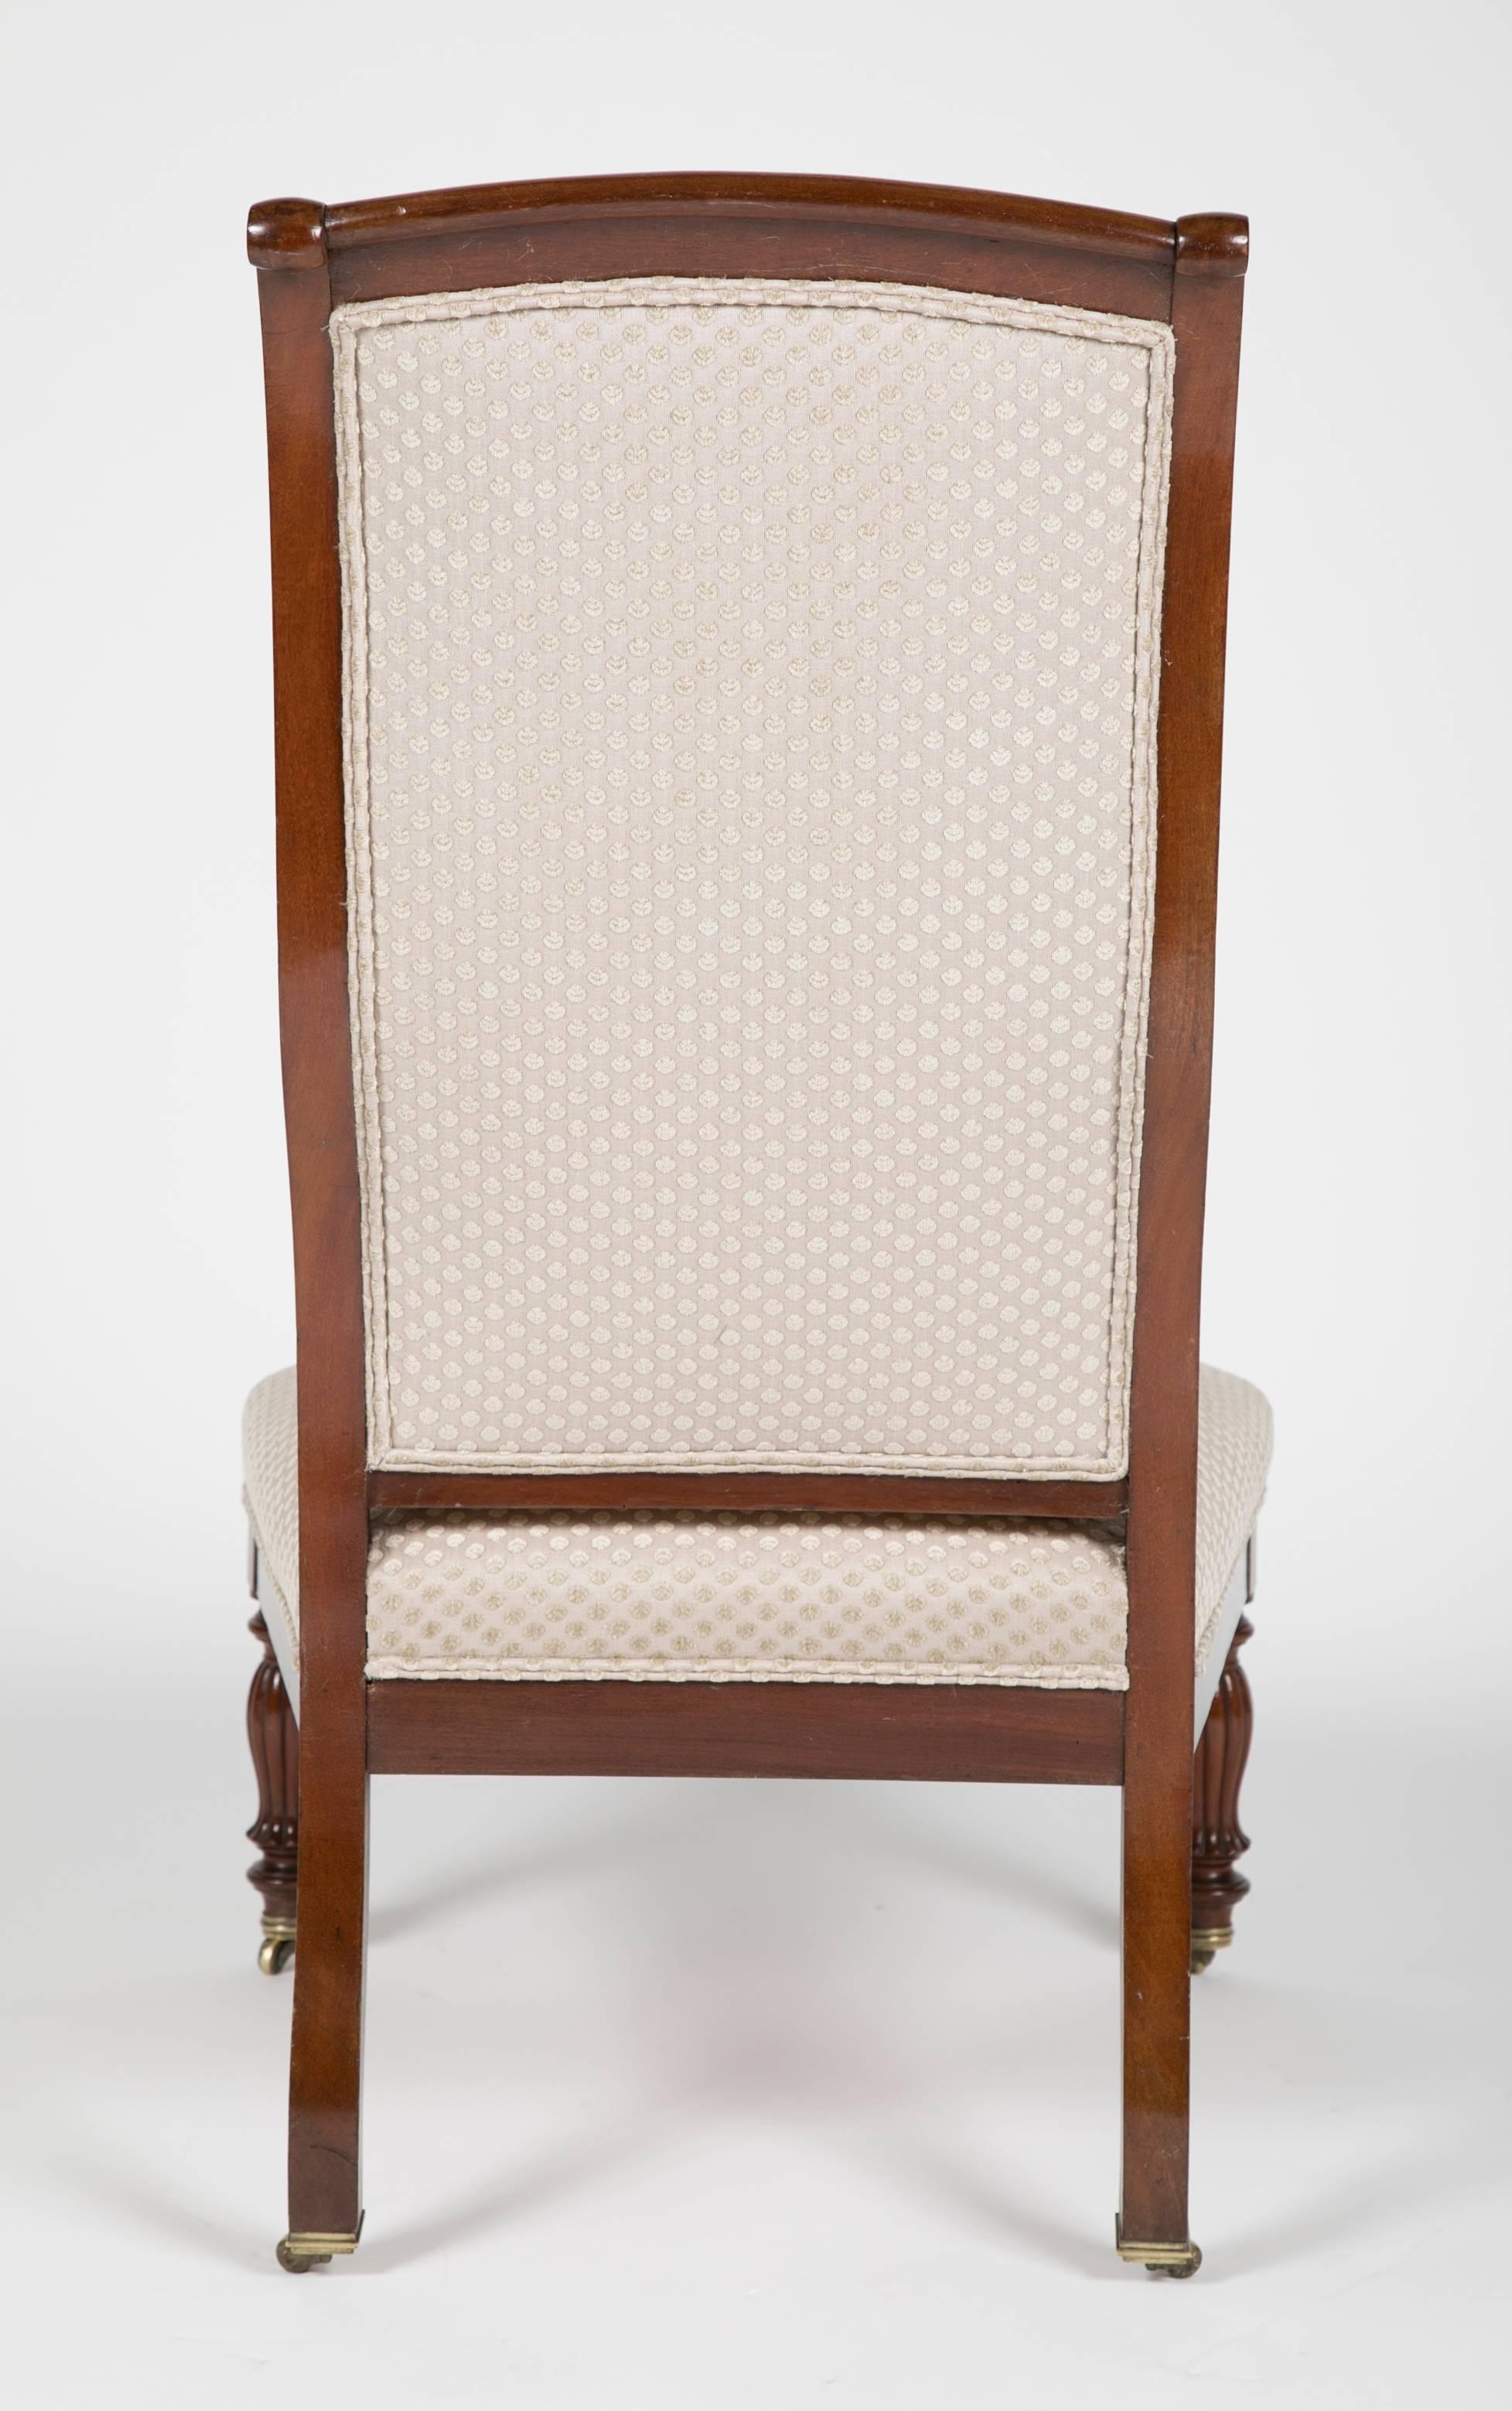 Mid-19th Century Matched Pair of Early Louis Philippe Mahogany Chauffeufes/Slipper Chairs For Sale